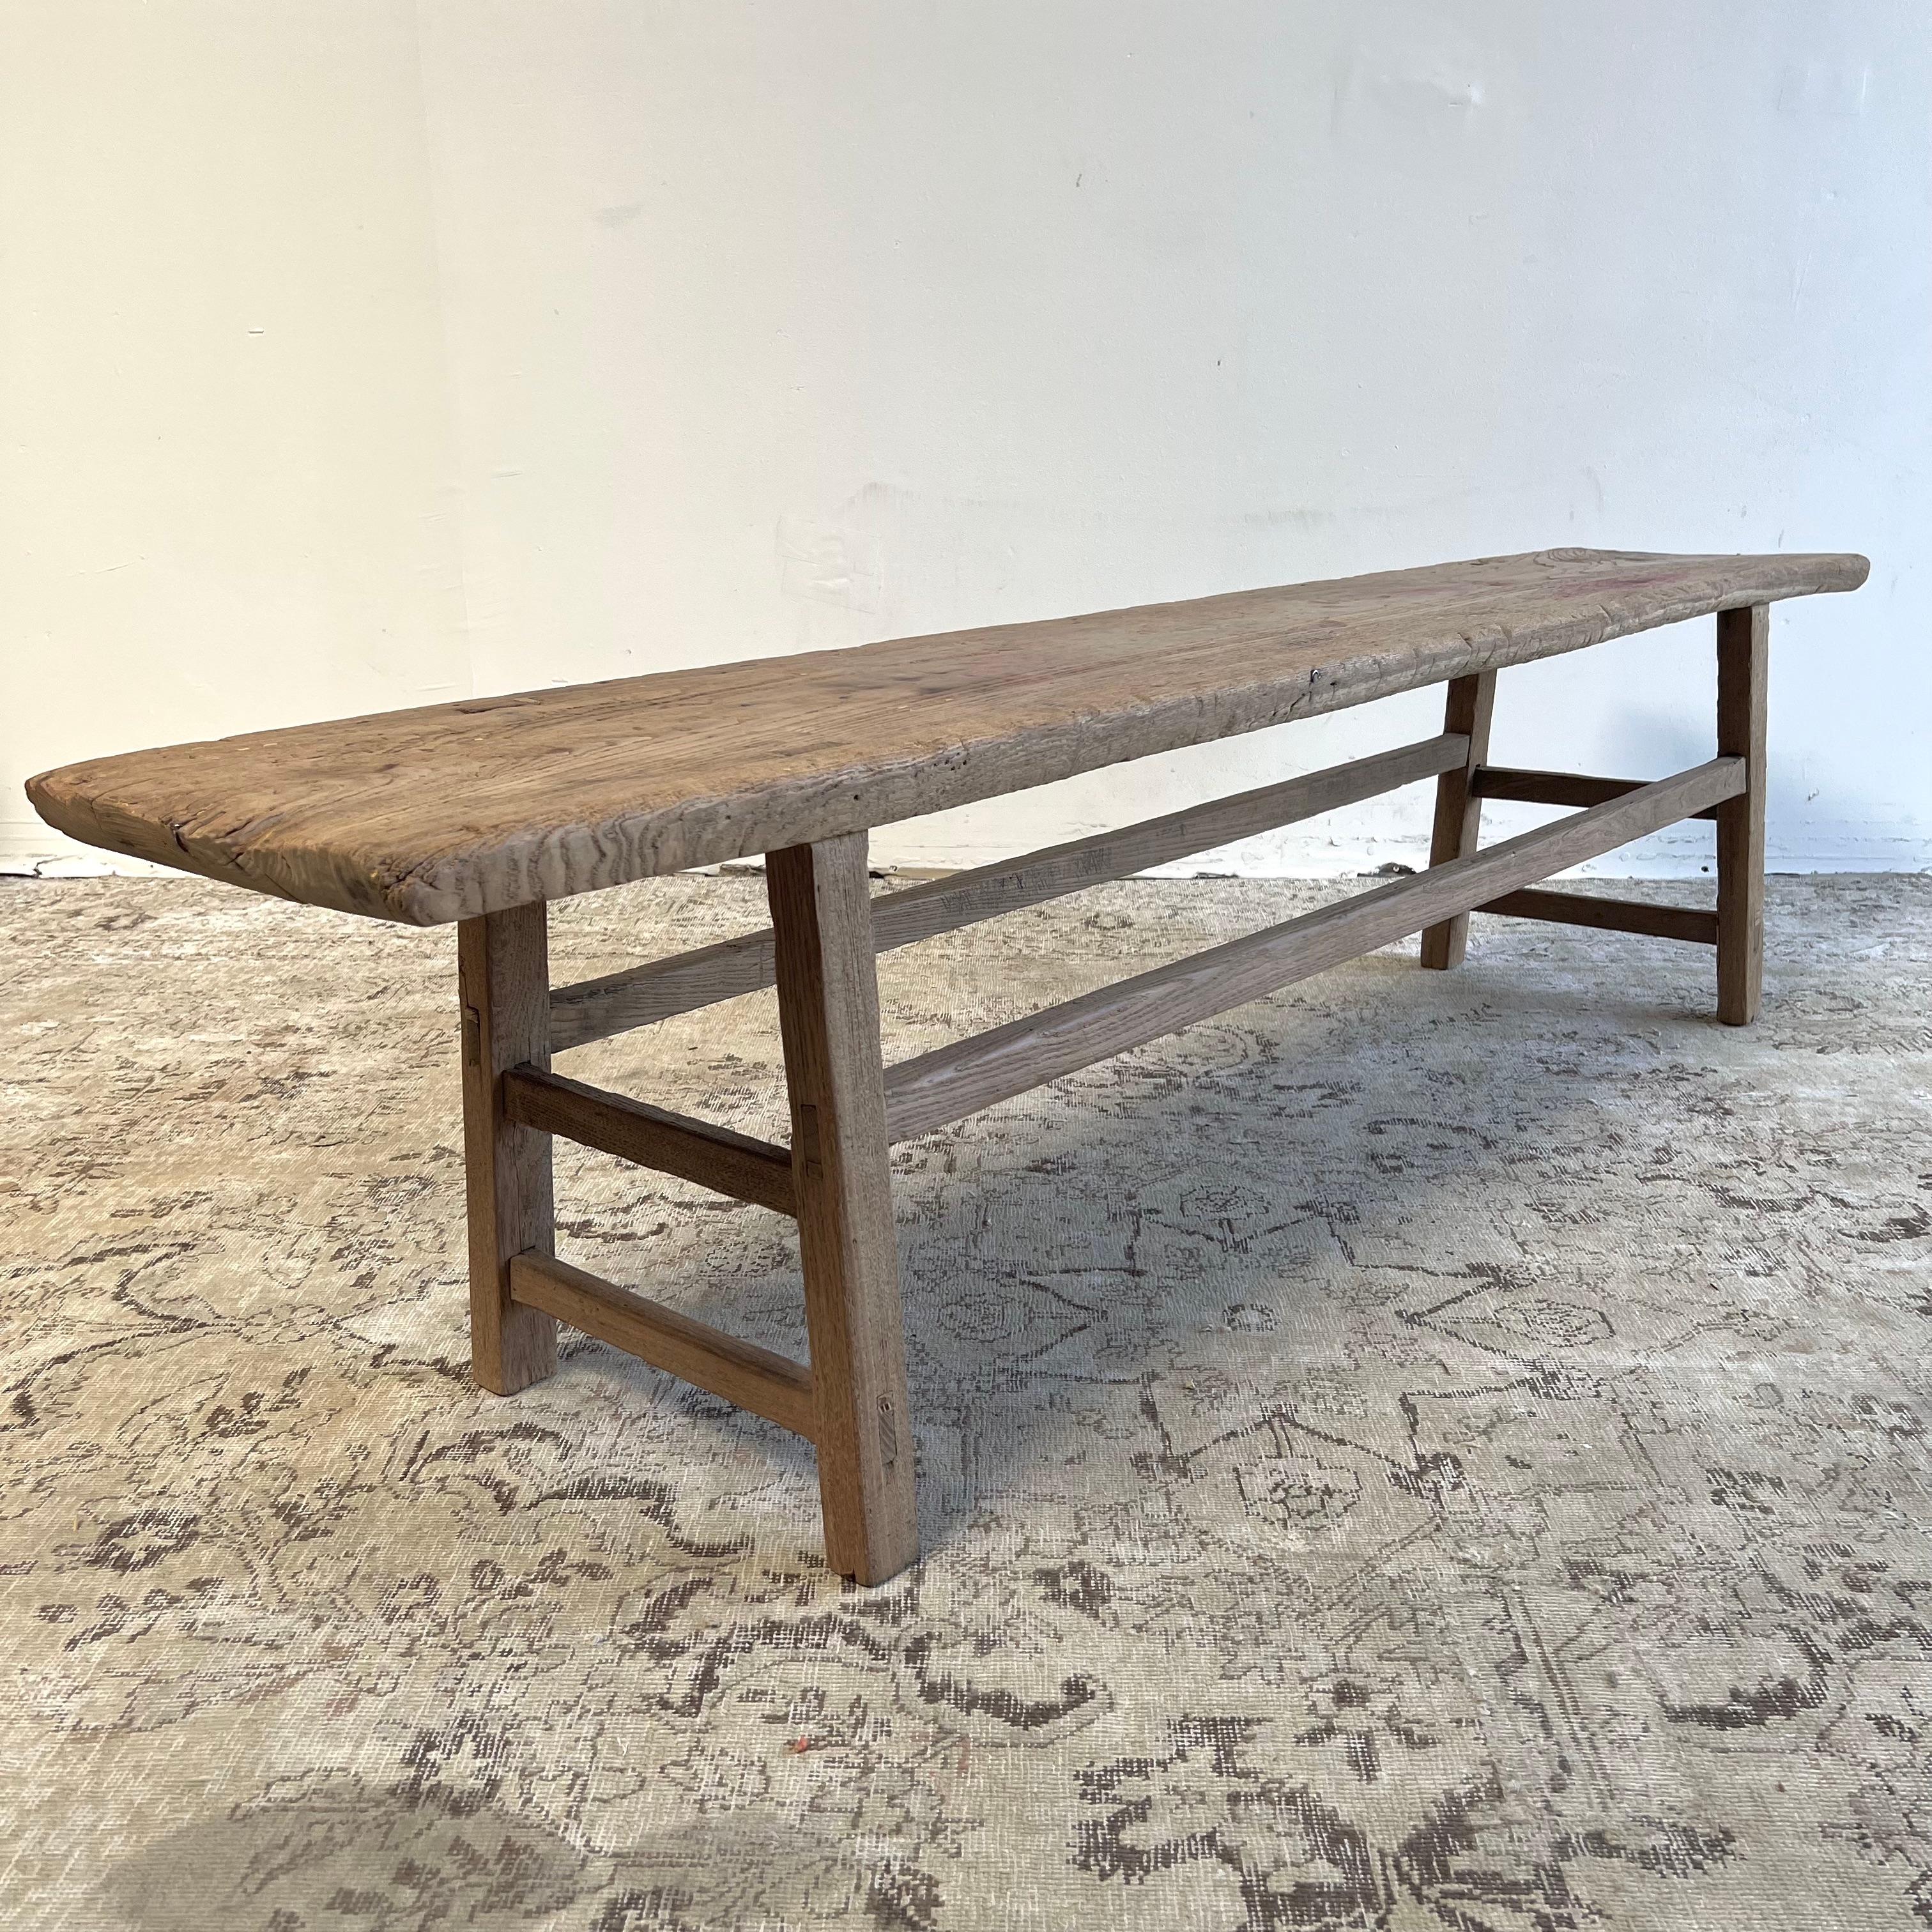 Vintage antique elm wood coffee table with beautiful antique weathered patina top Beautiful antique patina, with weathering and age, these are solid and sturdy ready for daily use, use as a coffee table or entry bench. Each piece is truly unique and